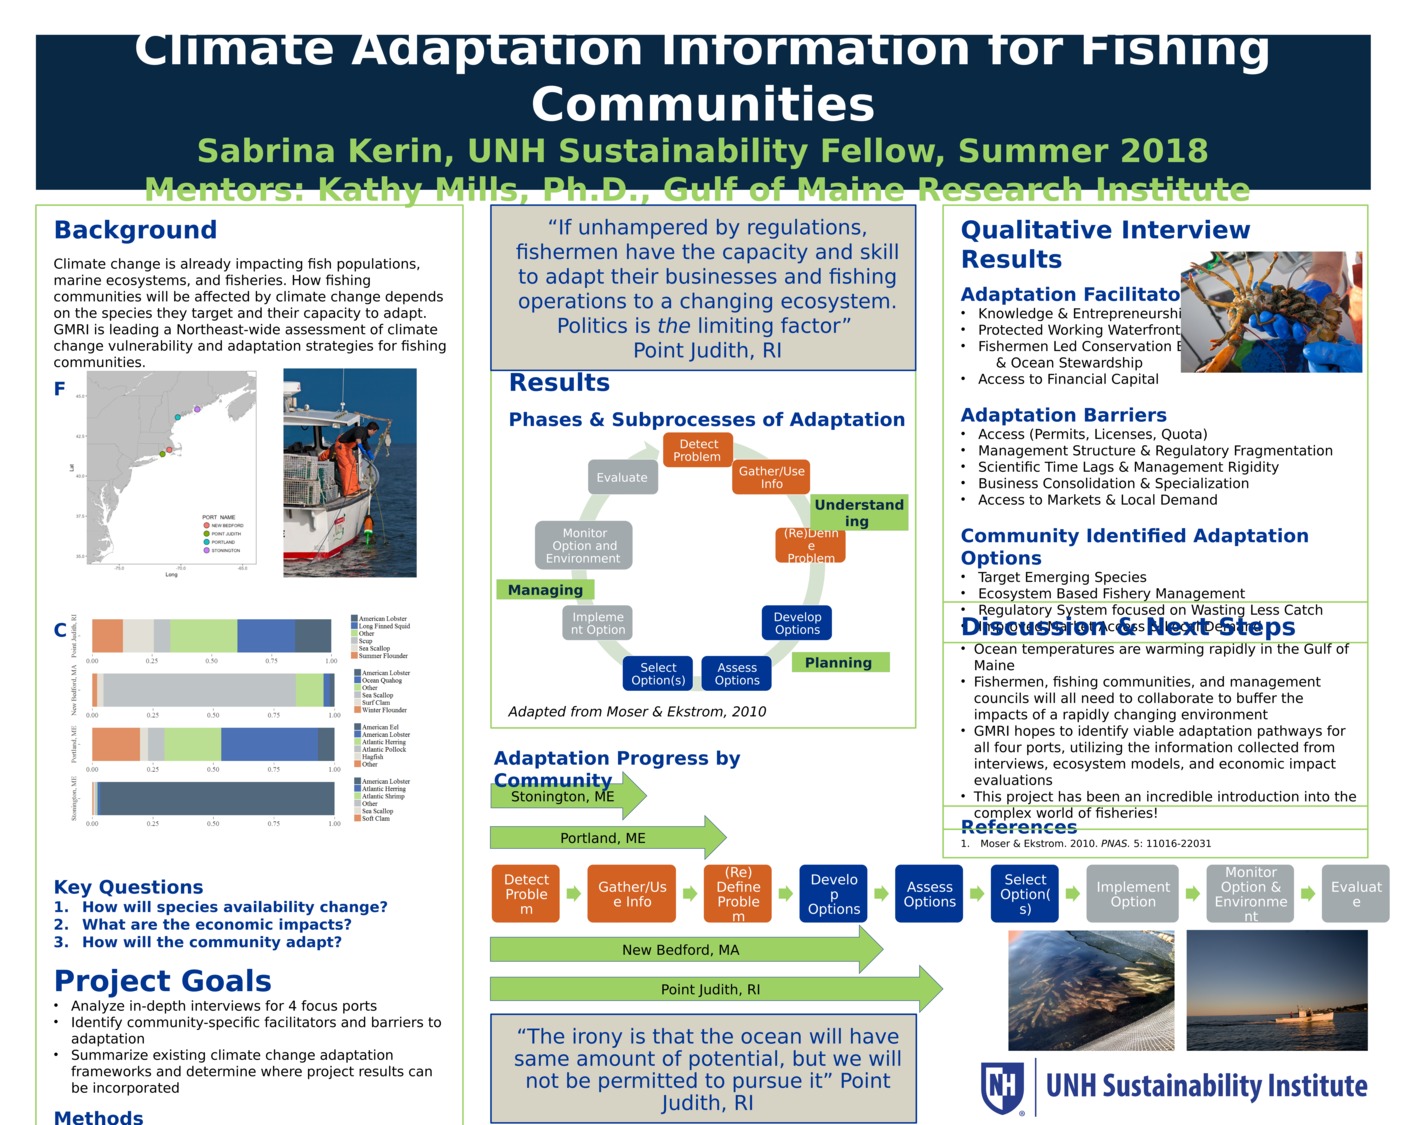 Climate Adaptation Information For Fishing Communities by Skerin